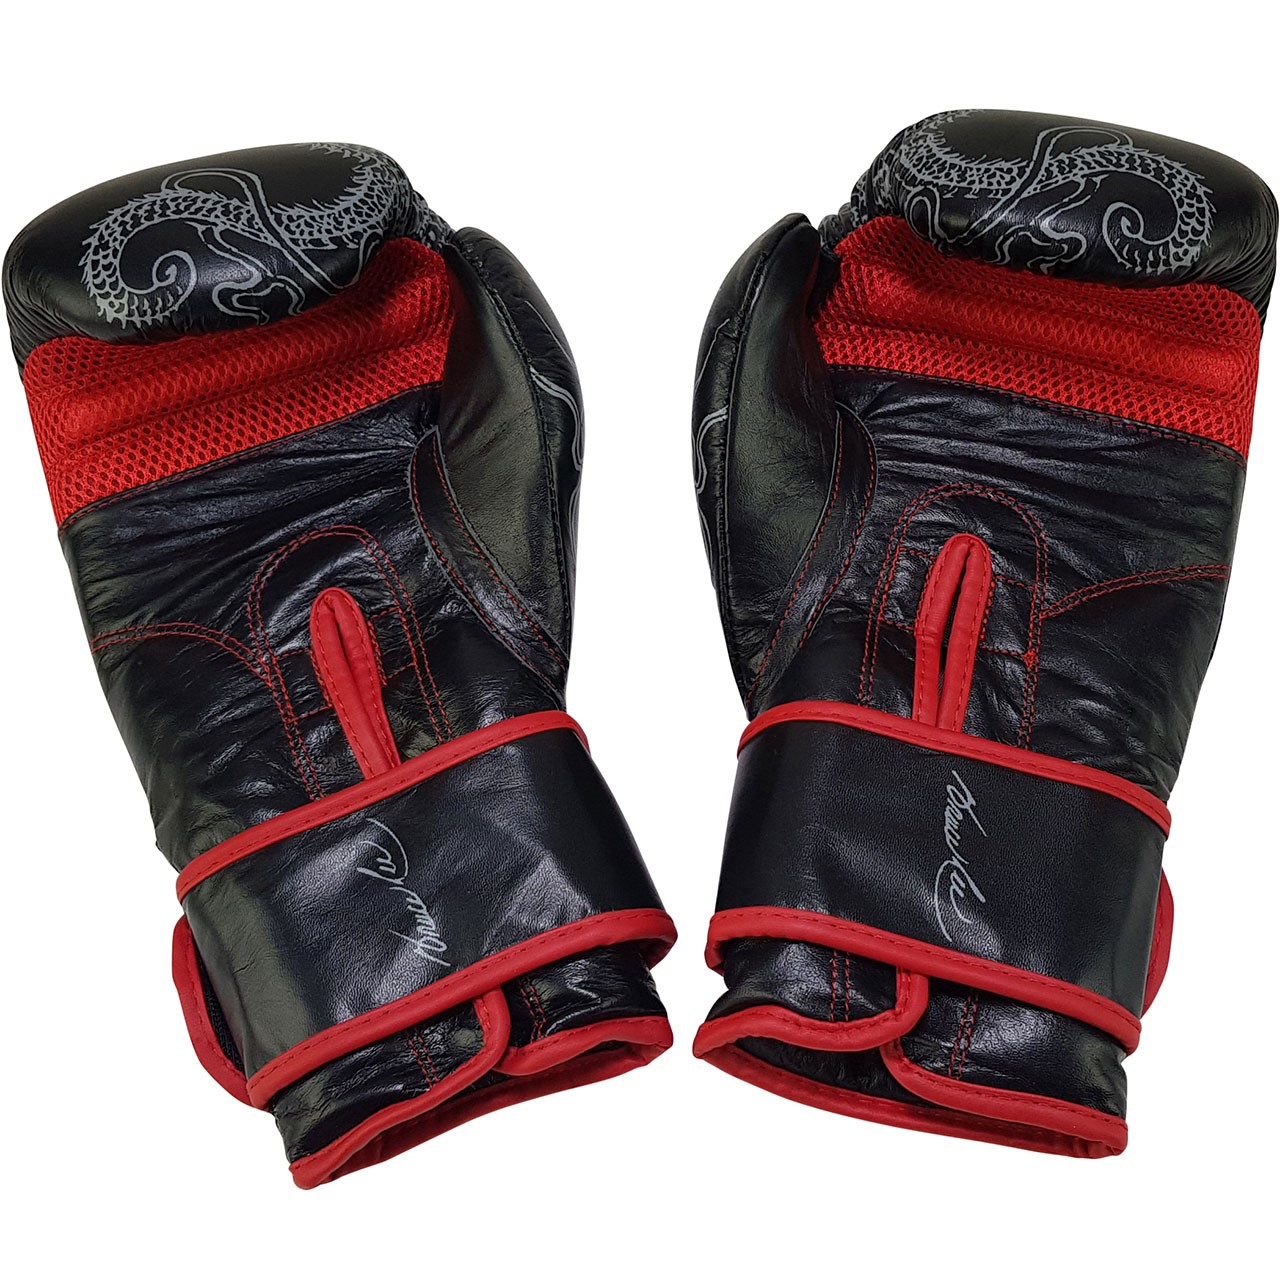 Bruce Lee Deluxe Boxing Gloves